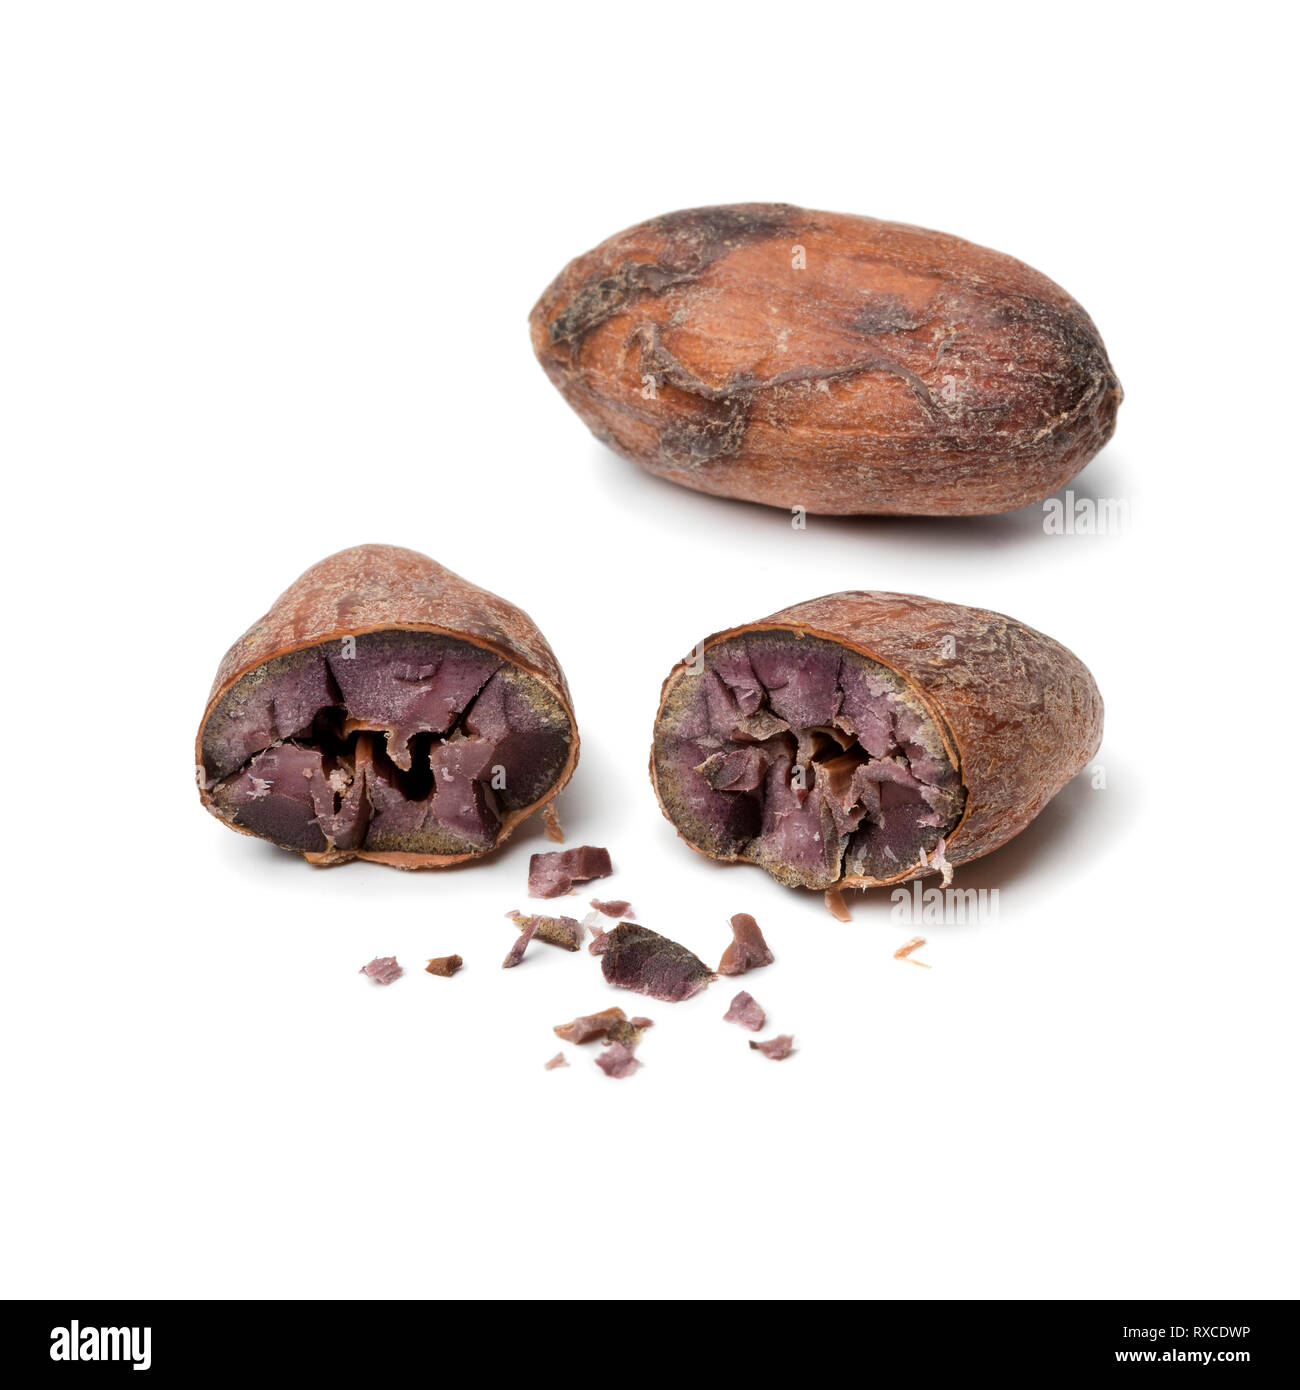 Whole and halved cocoa bean close up isolated on white background Stock Photo